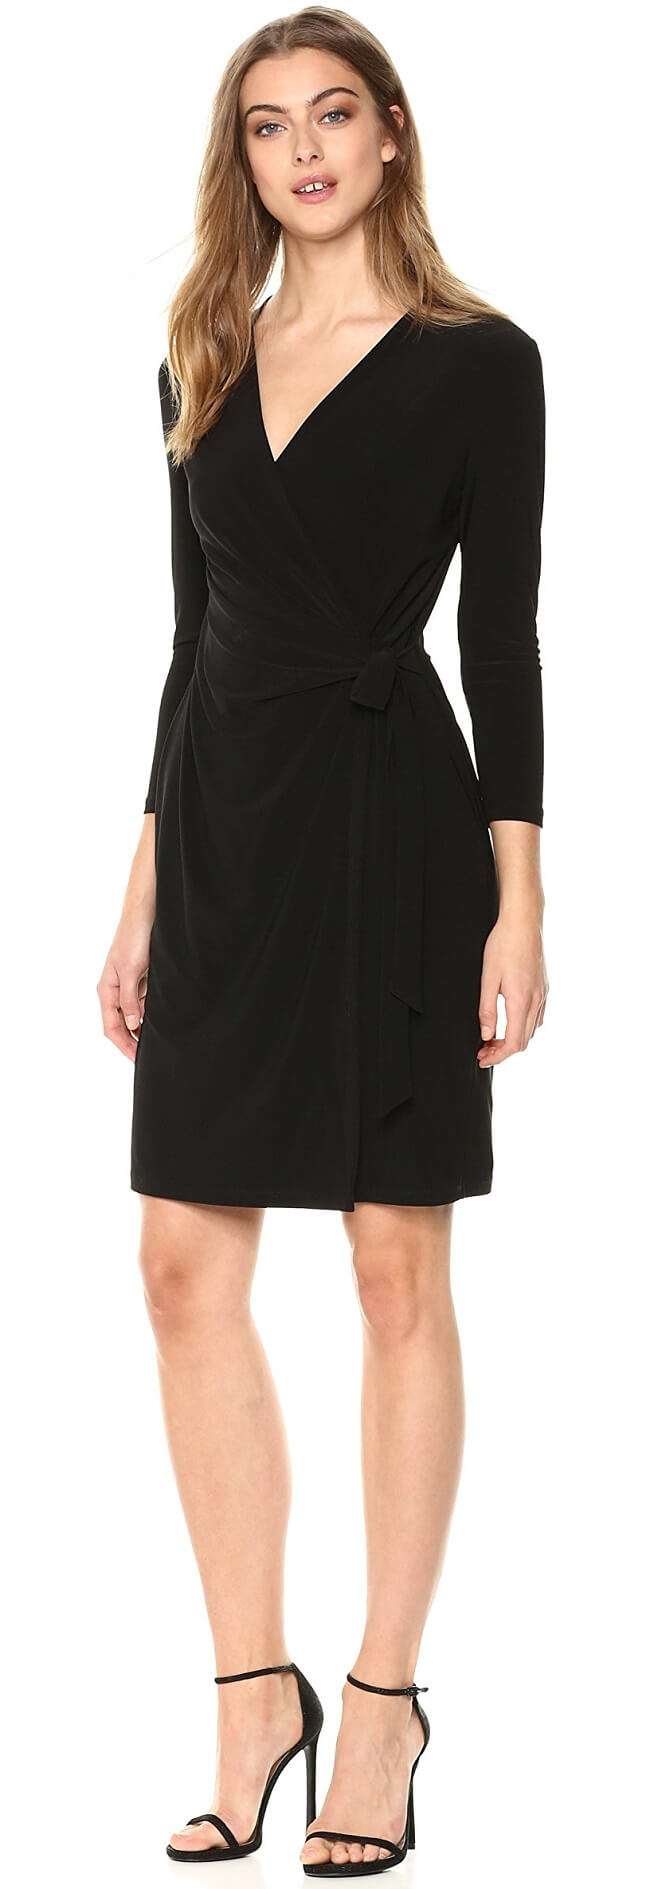 cheap black dress for funeral Big sale - OFF 78%